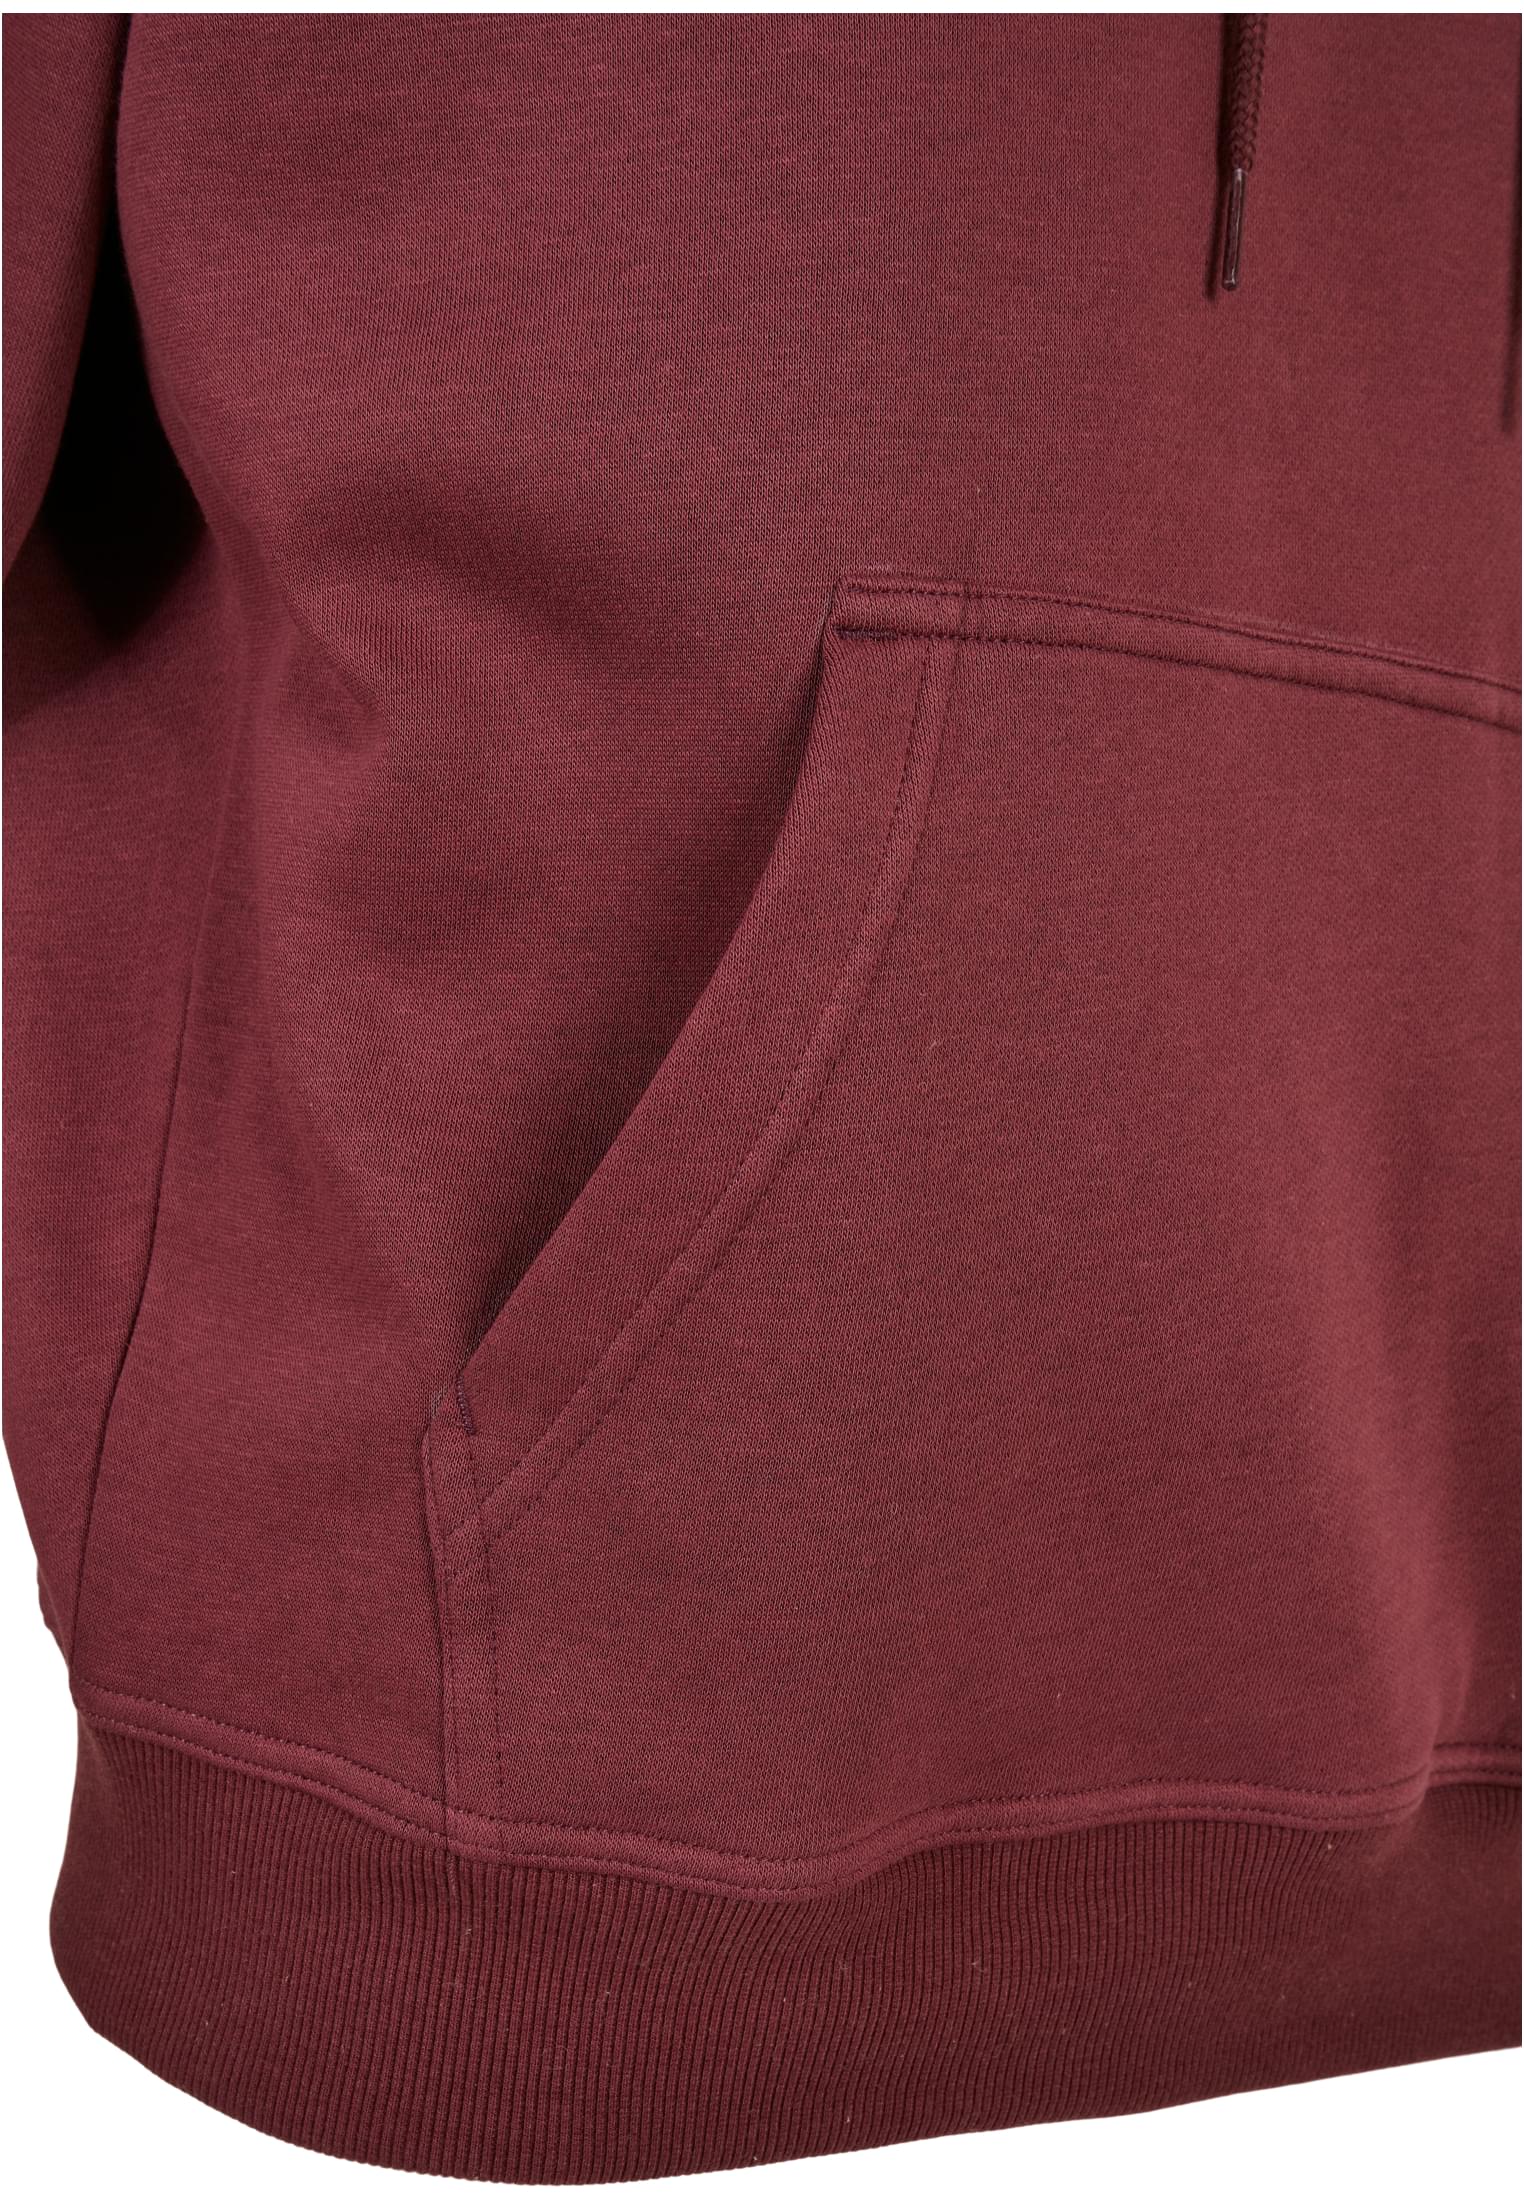 Plus Size Blank Hoody in Farbe cherry